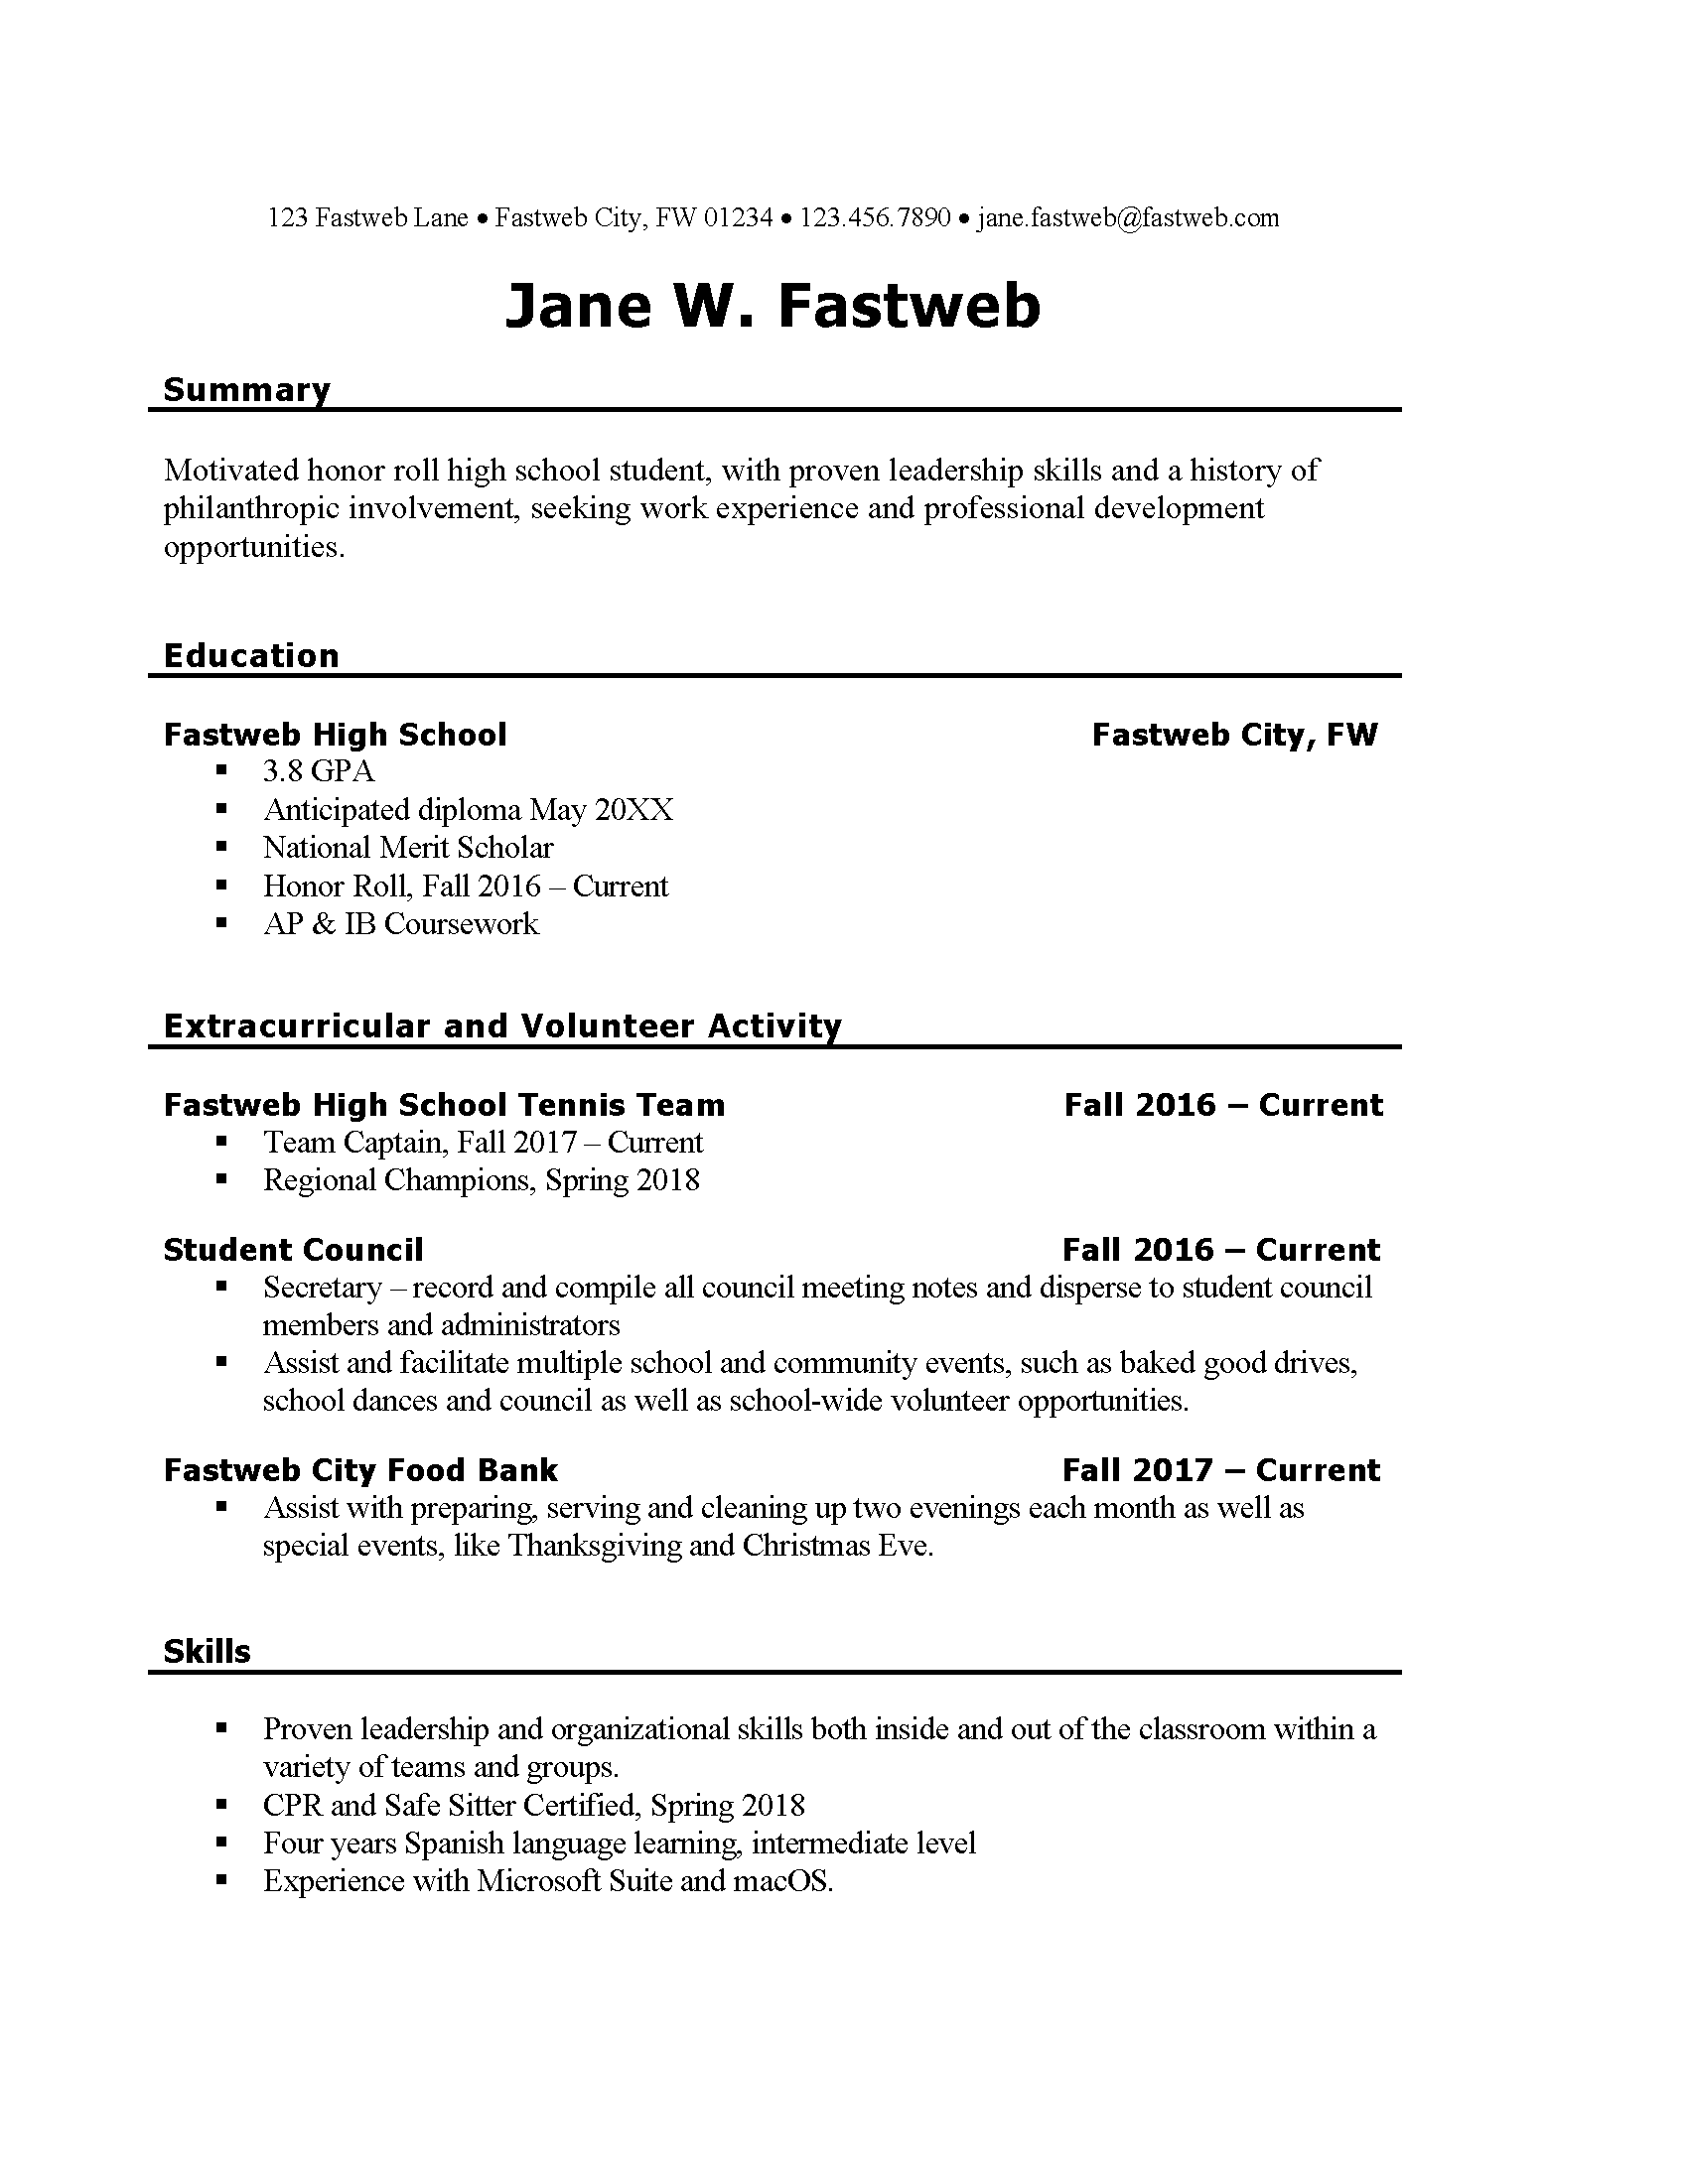 resume for first job